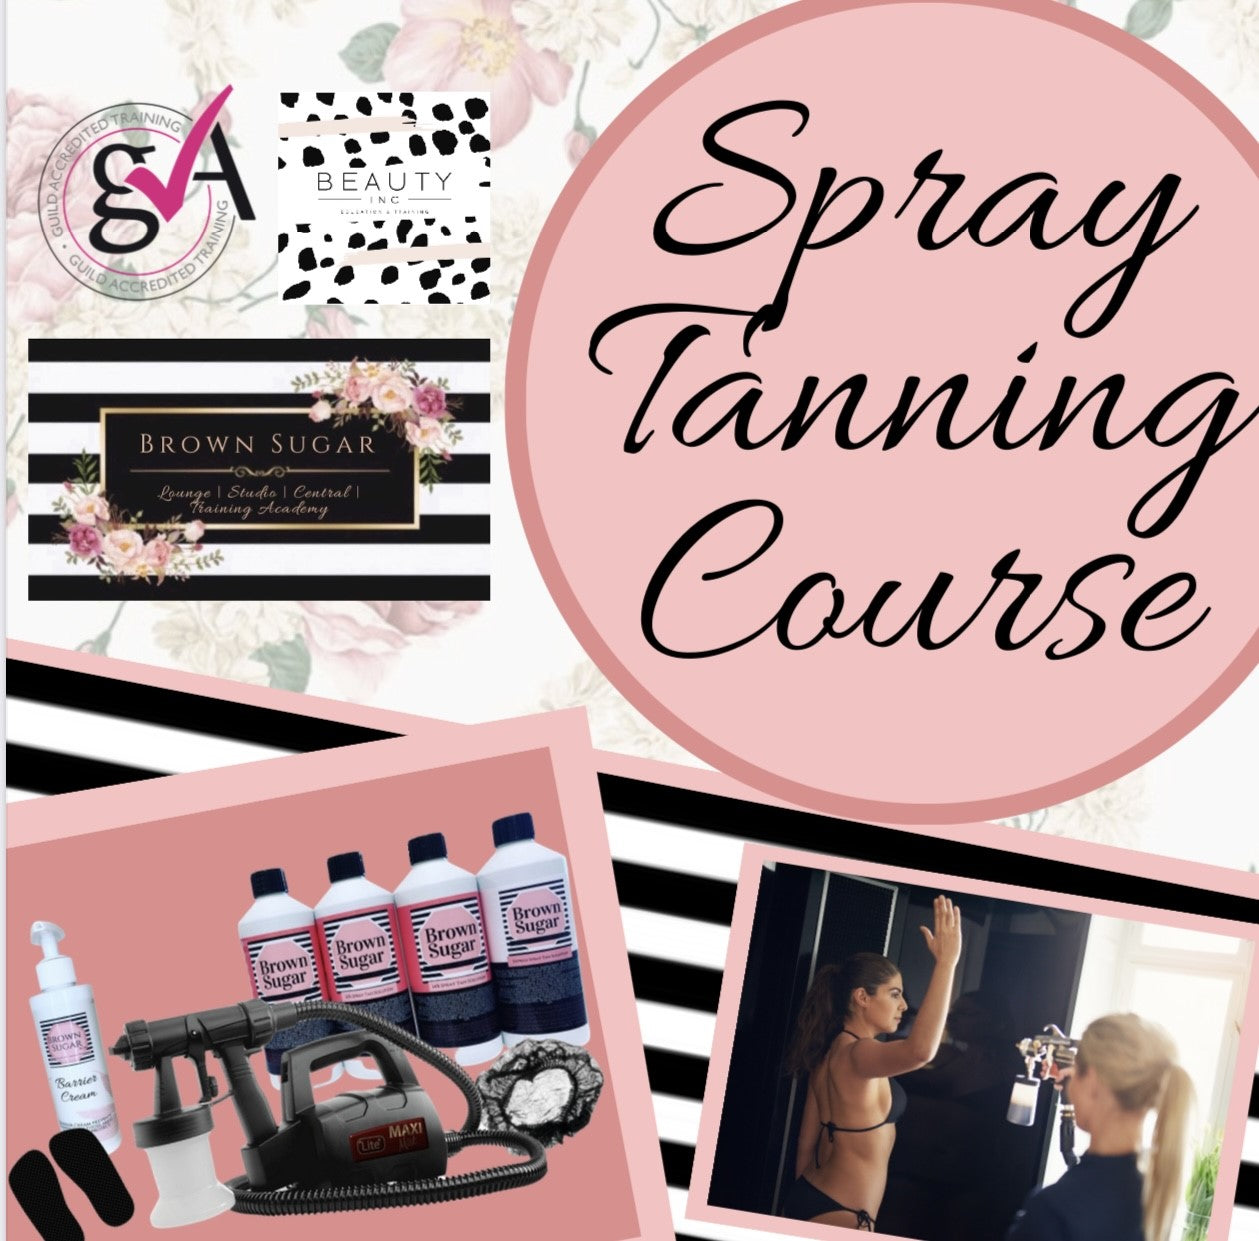 Brown Sugar Spray Tanning Course (PAYING BY LAYBUY)